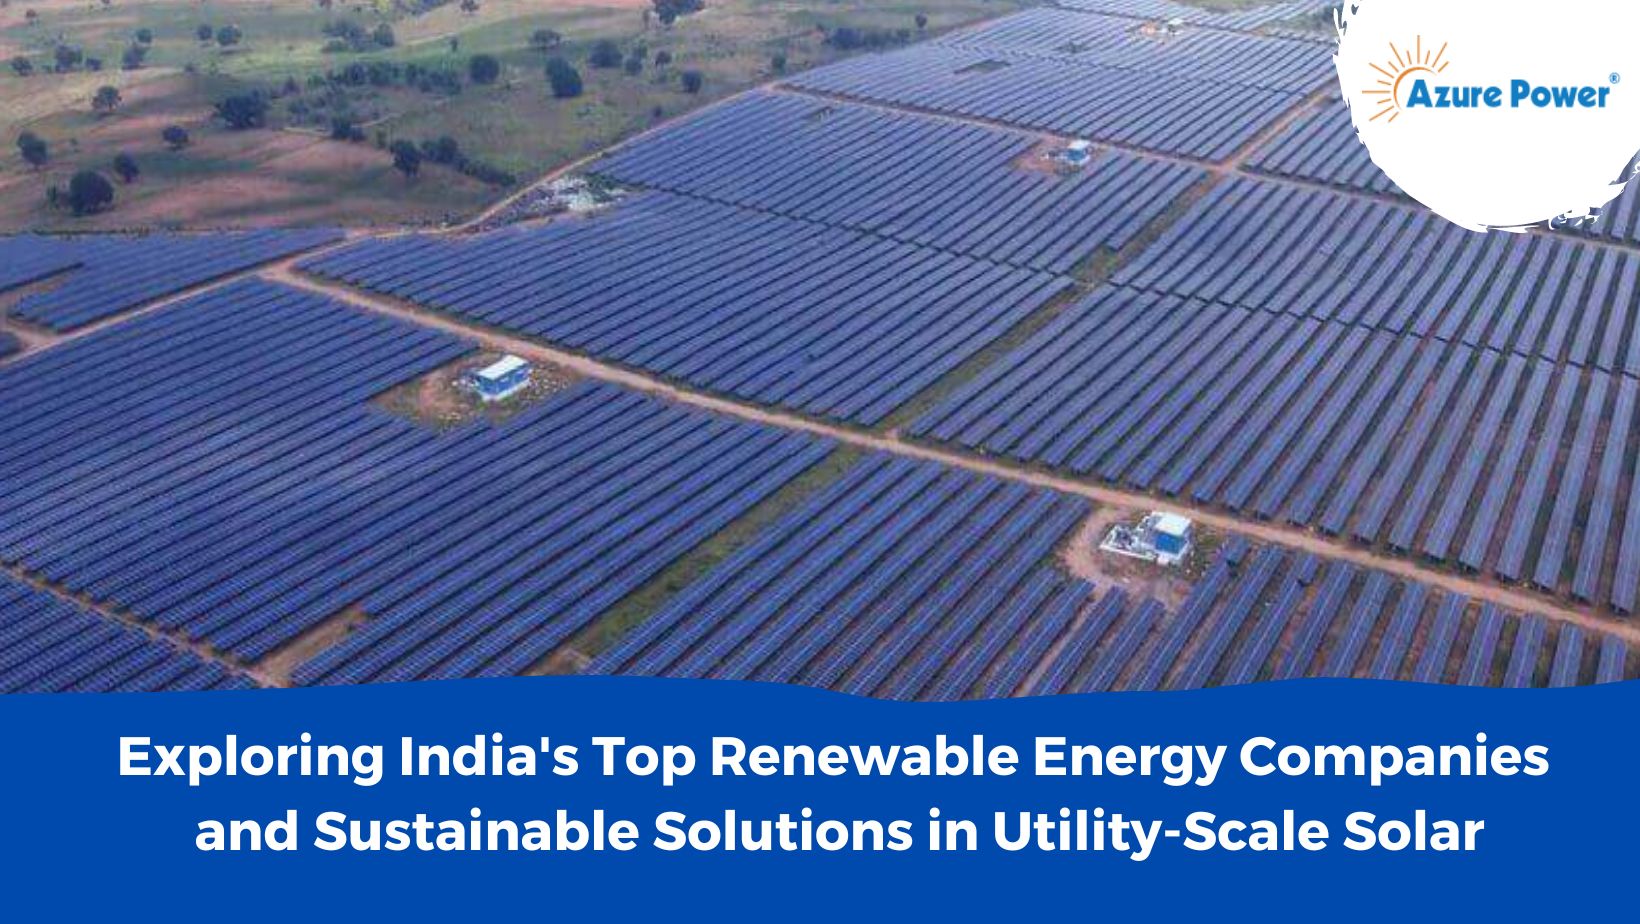 Exploring India's Top Renewable Energy Companies and Sustainable Solutions in Utility-Scale Solar